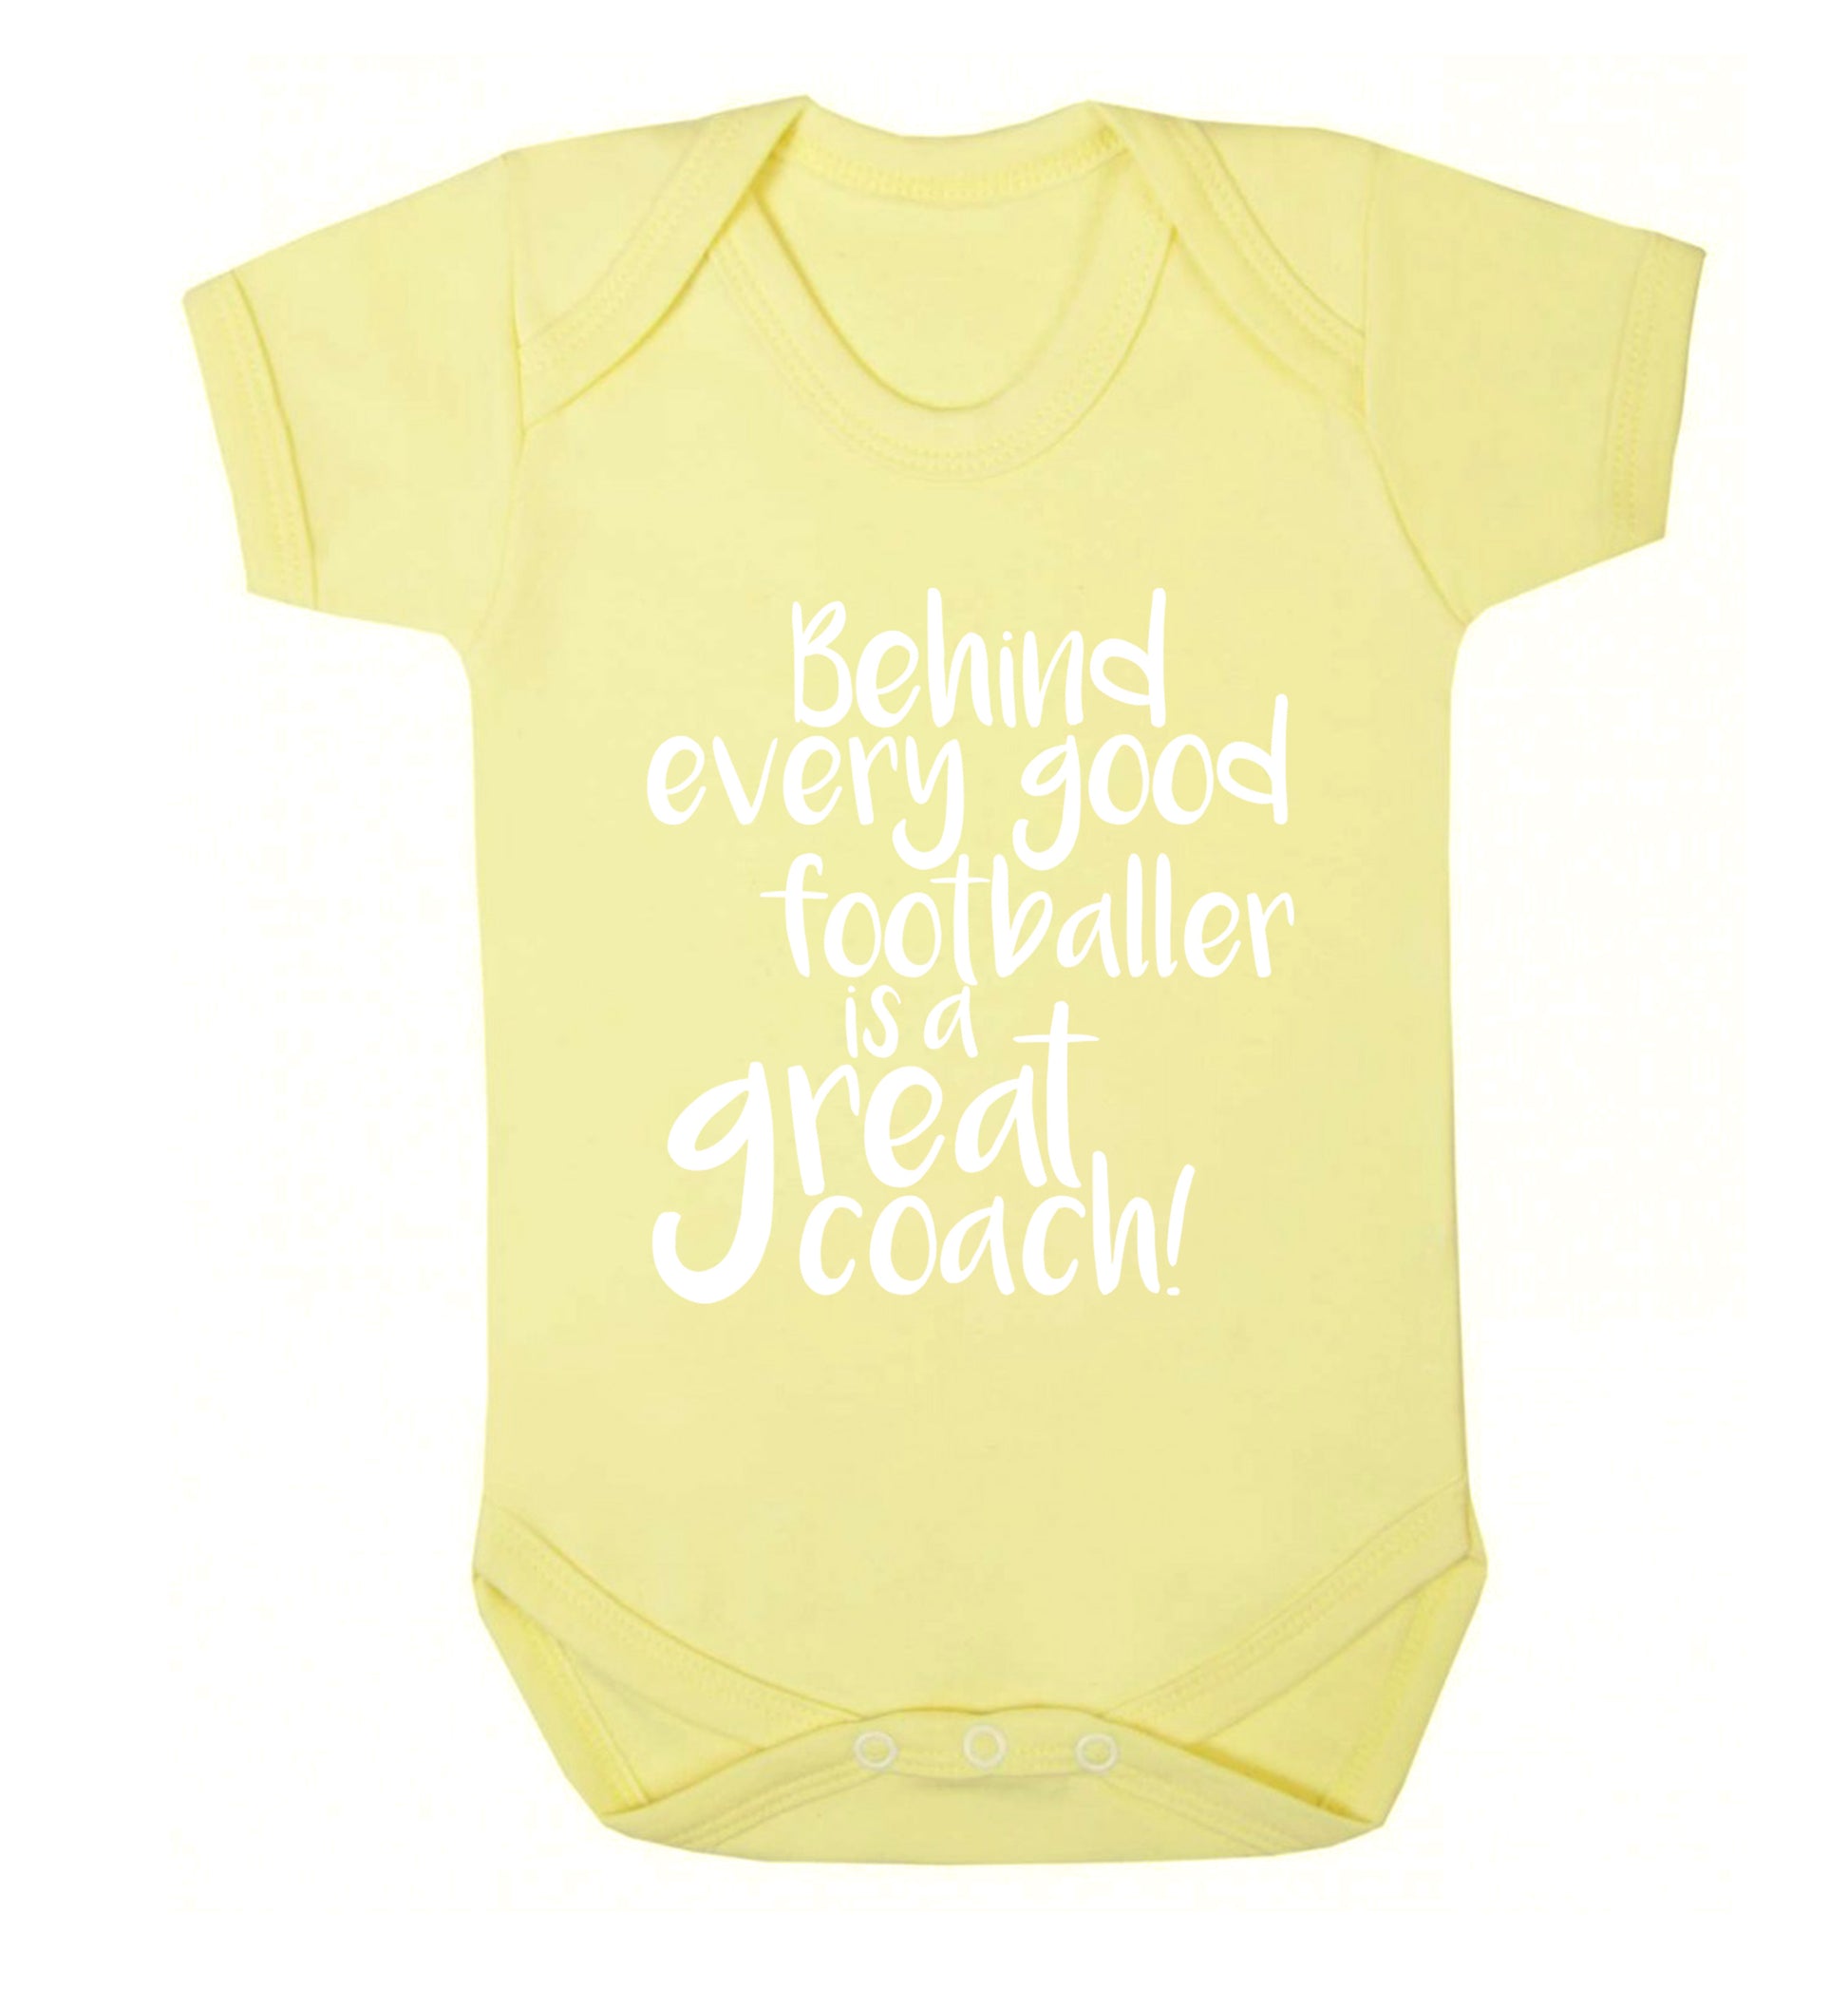 Behind every good footballer is a great coach! Baby Vest pale yellow 18-24 months